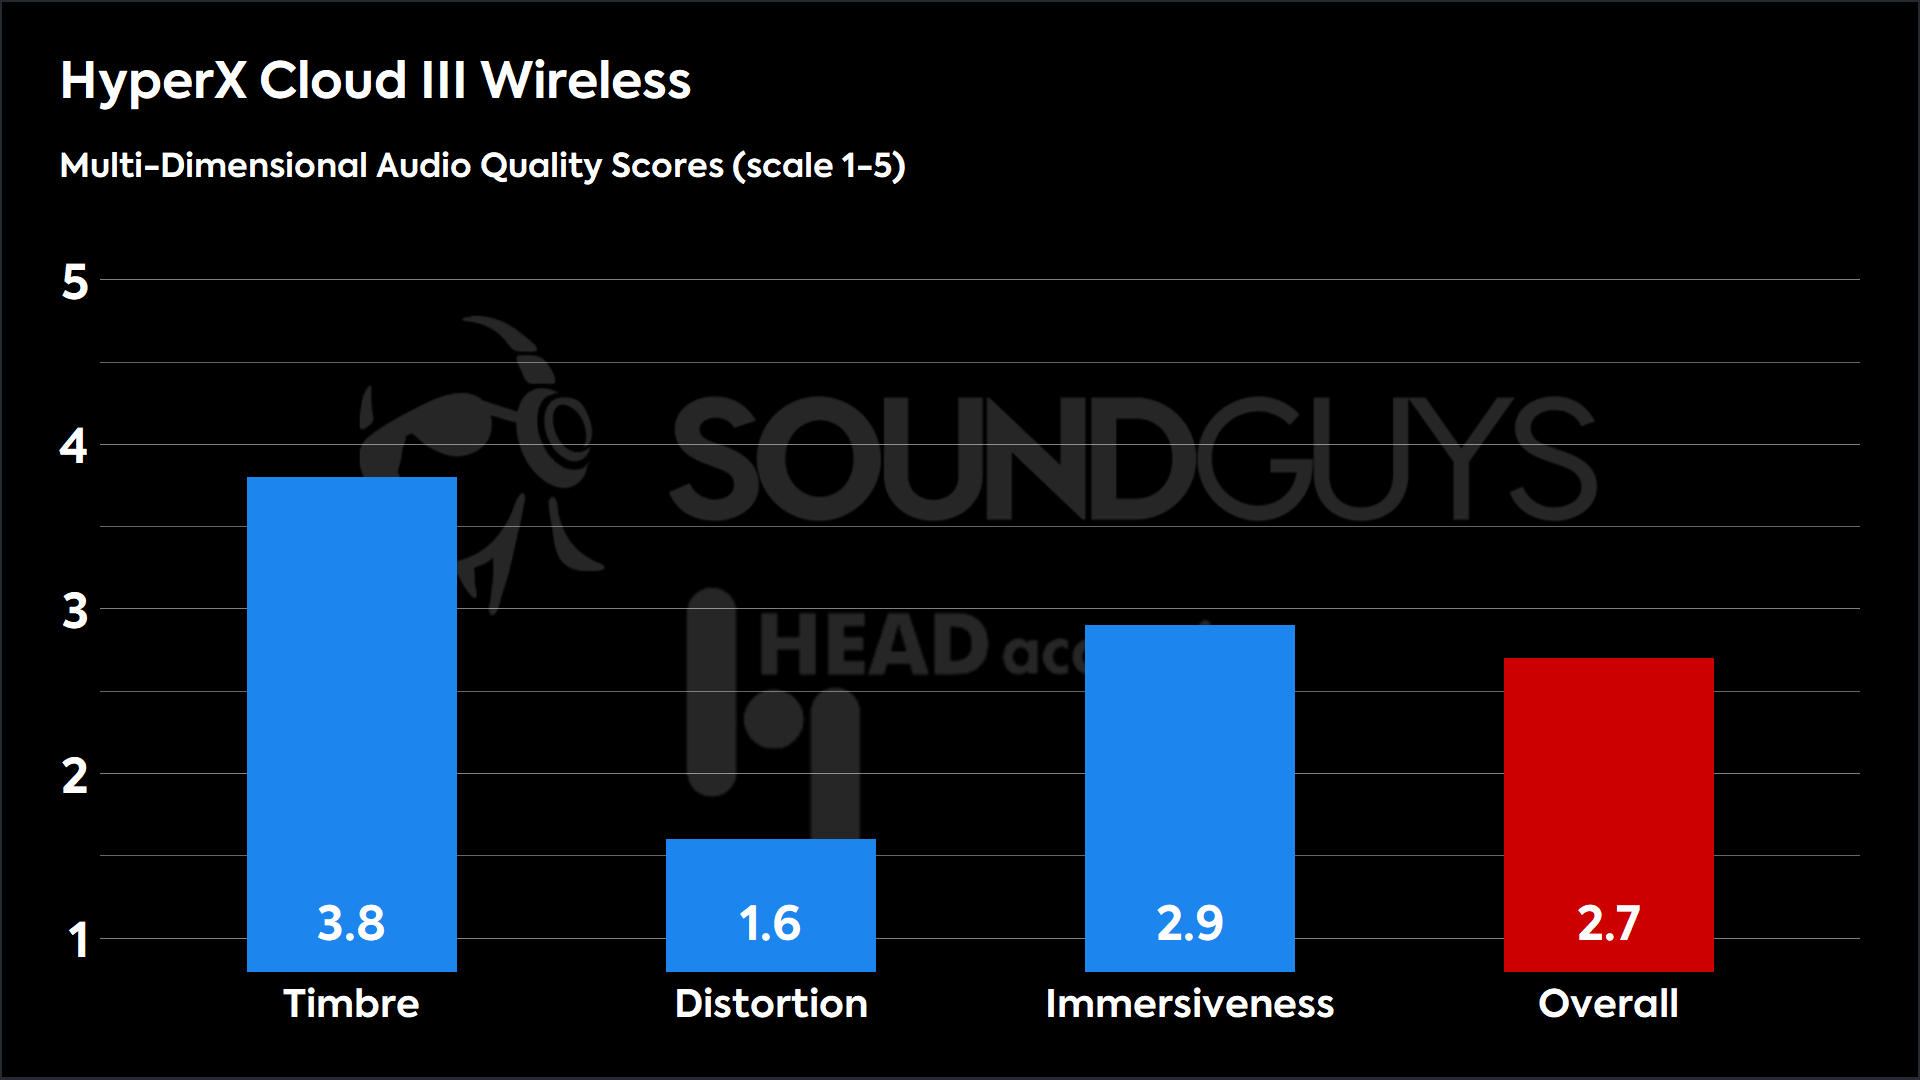 A bar plot showing the scores of the HyperX Cloud III Wireless.